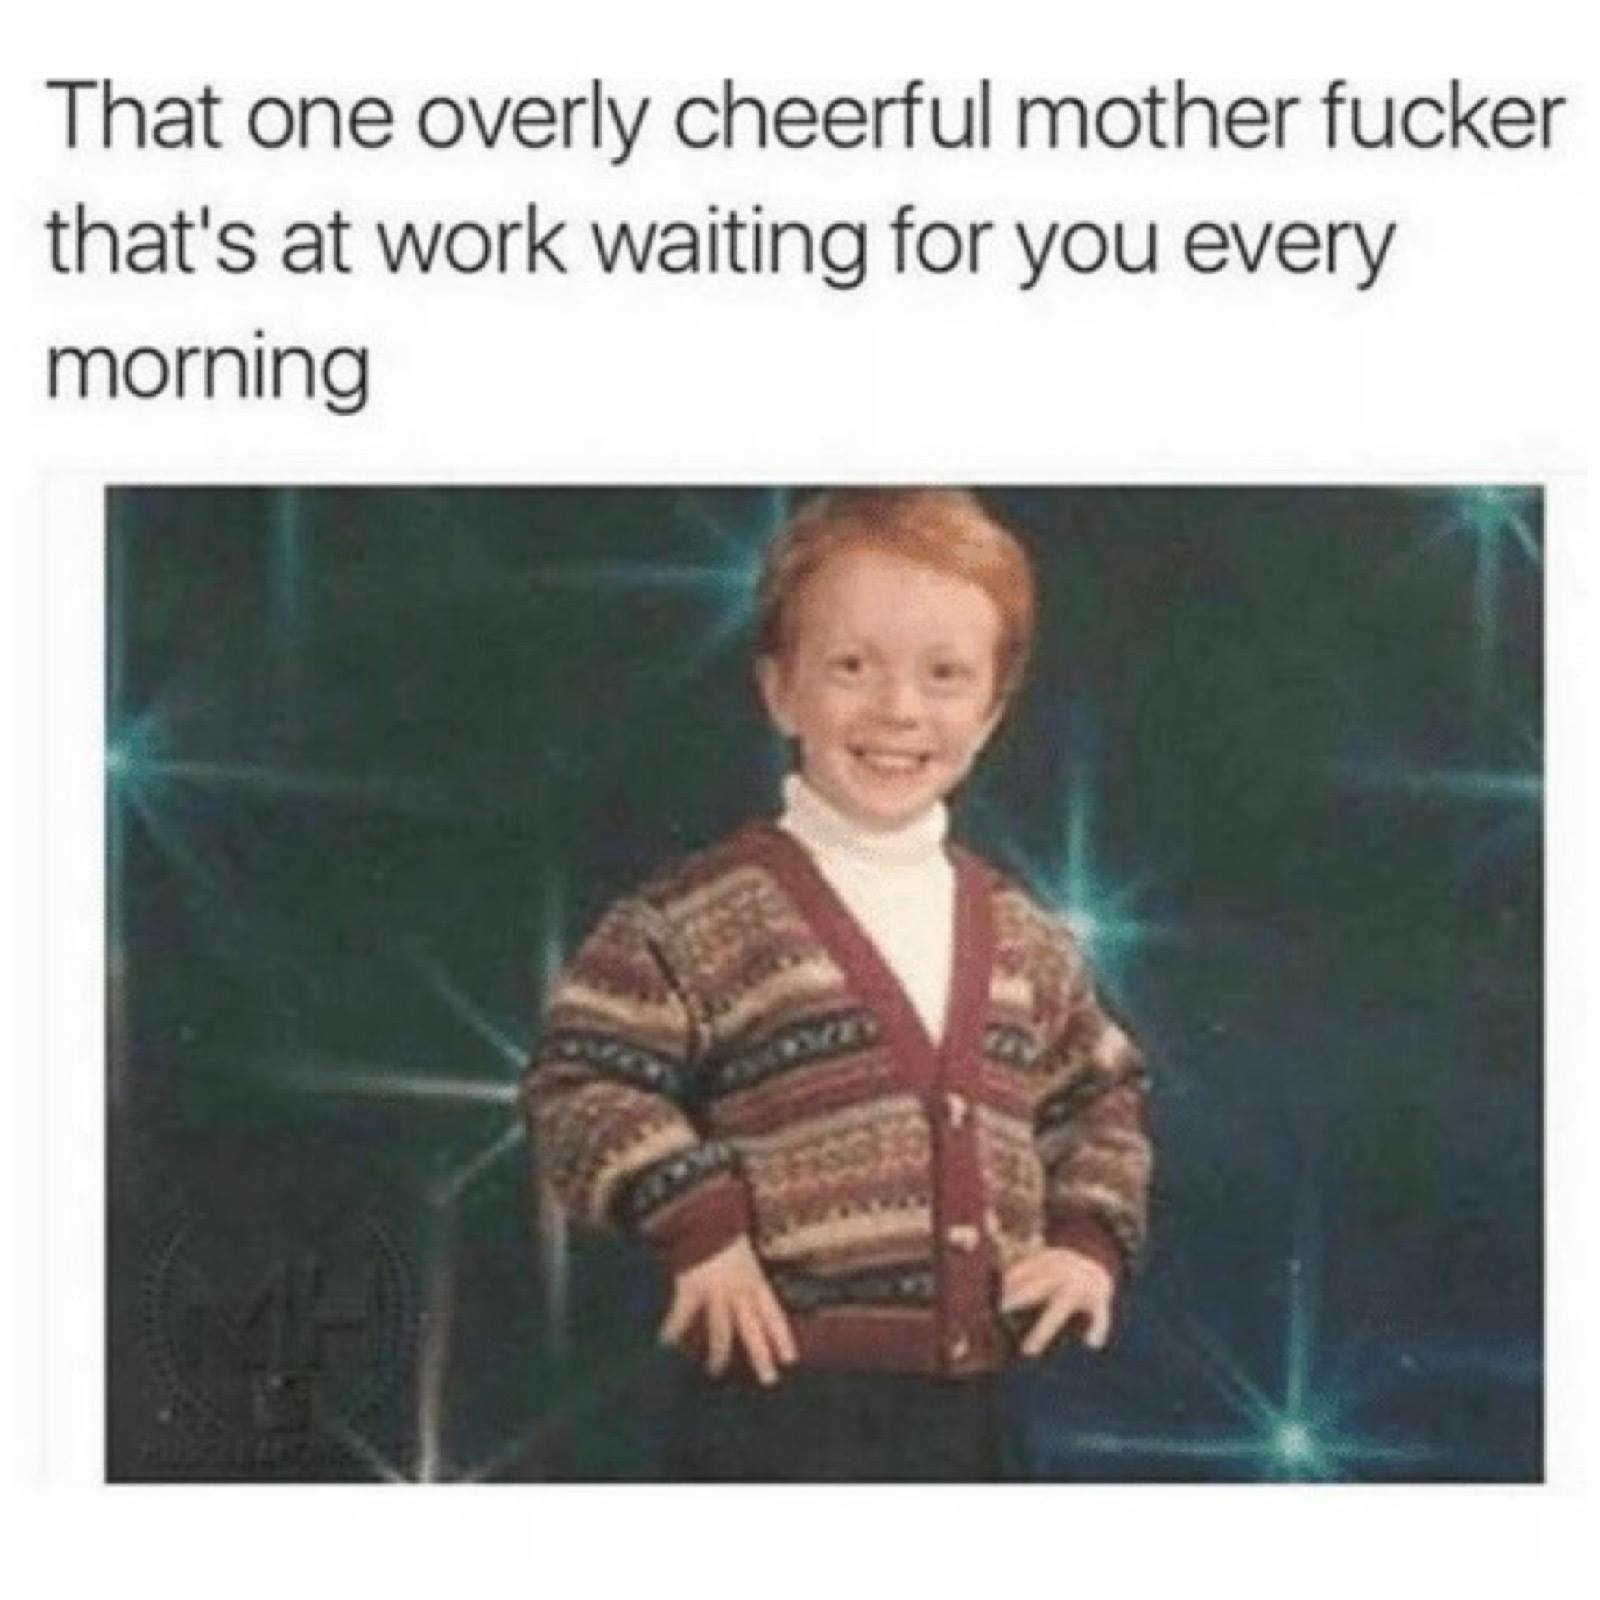 meme stream - happy person at work meme - That one overly cheerful mother fucker that's at work waiting for you every morning